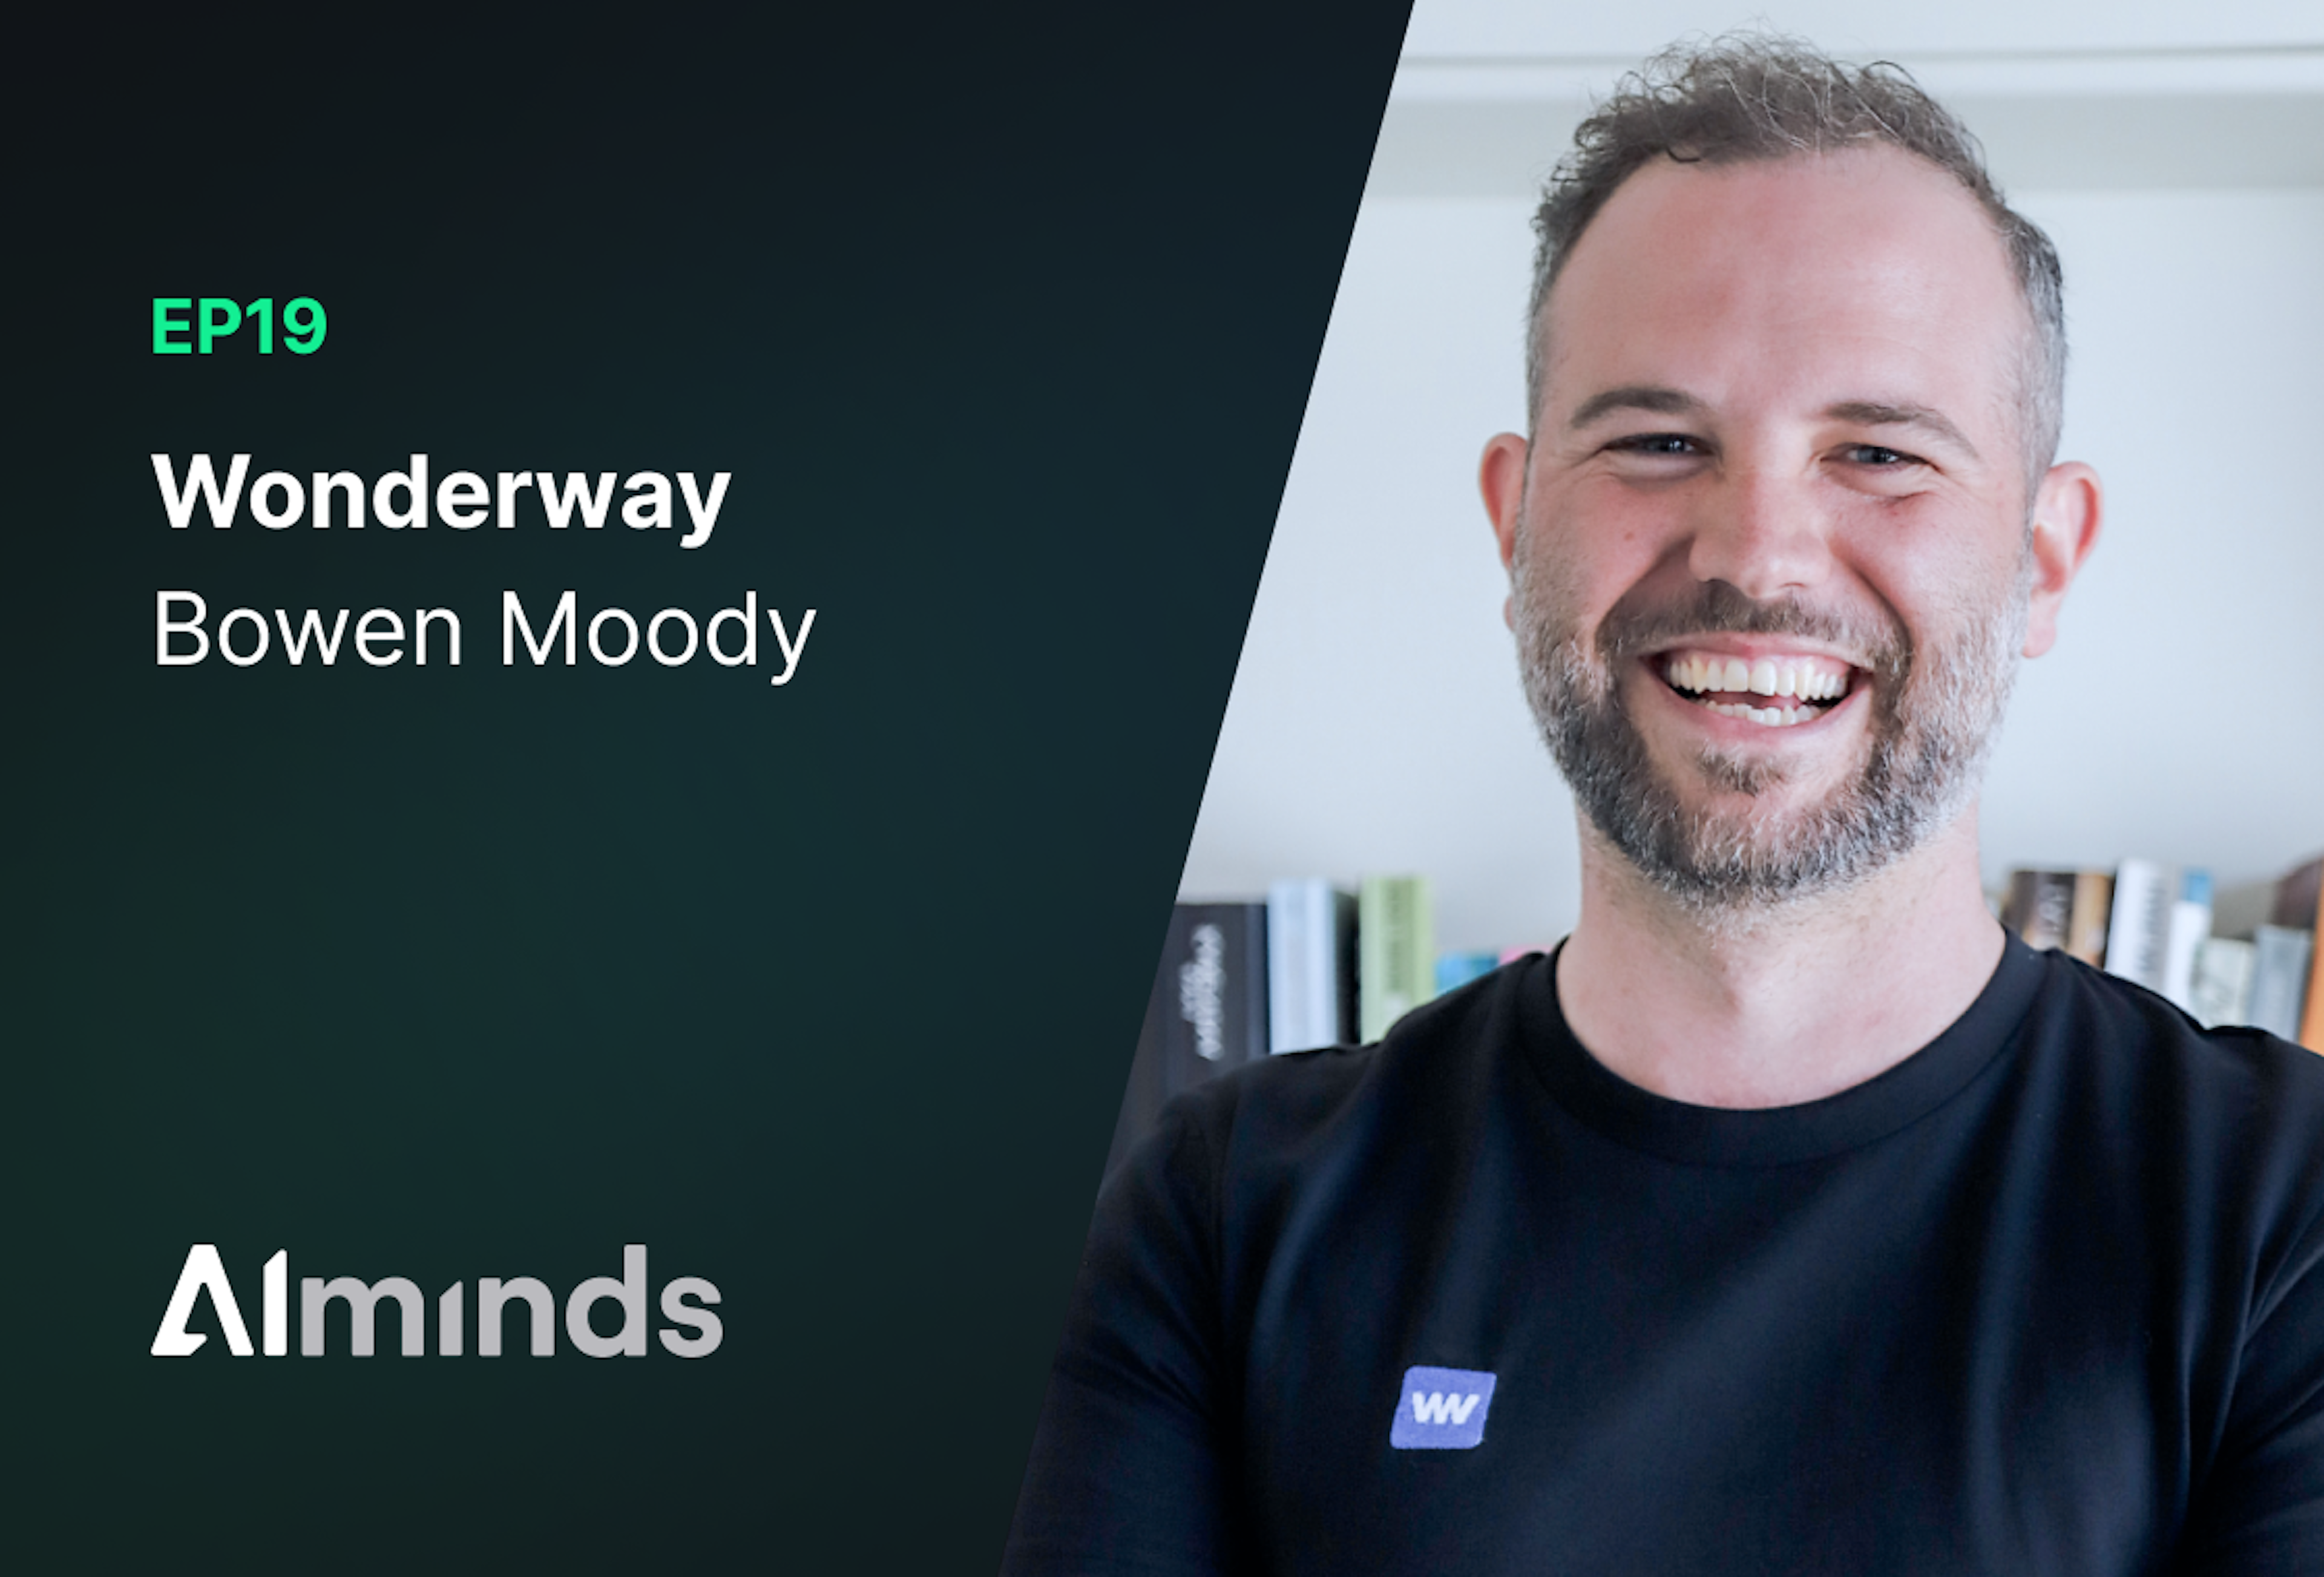 AIMinds #019 | Bowen Moody, CEO & Co-founder of Wonderway